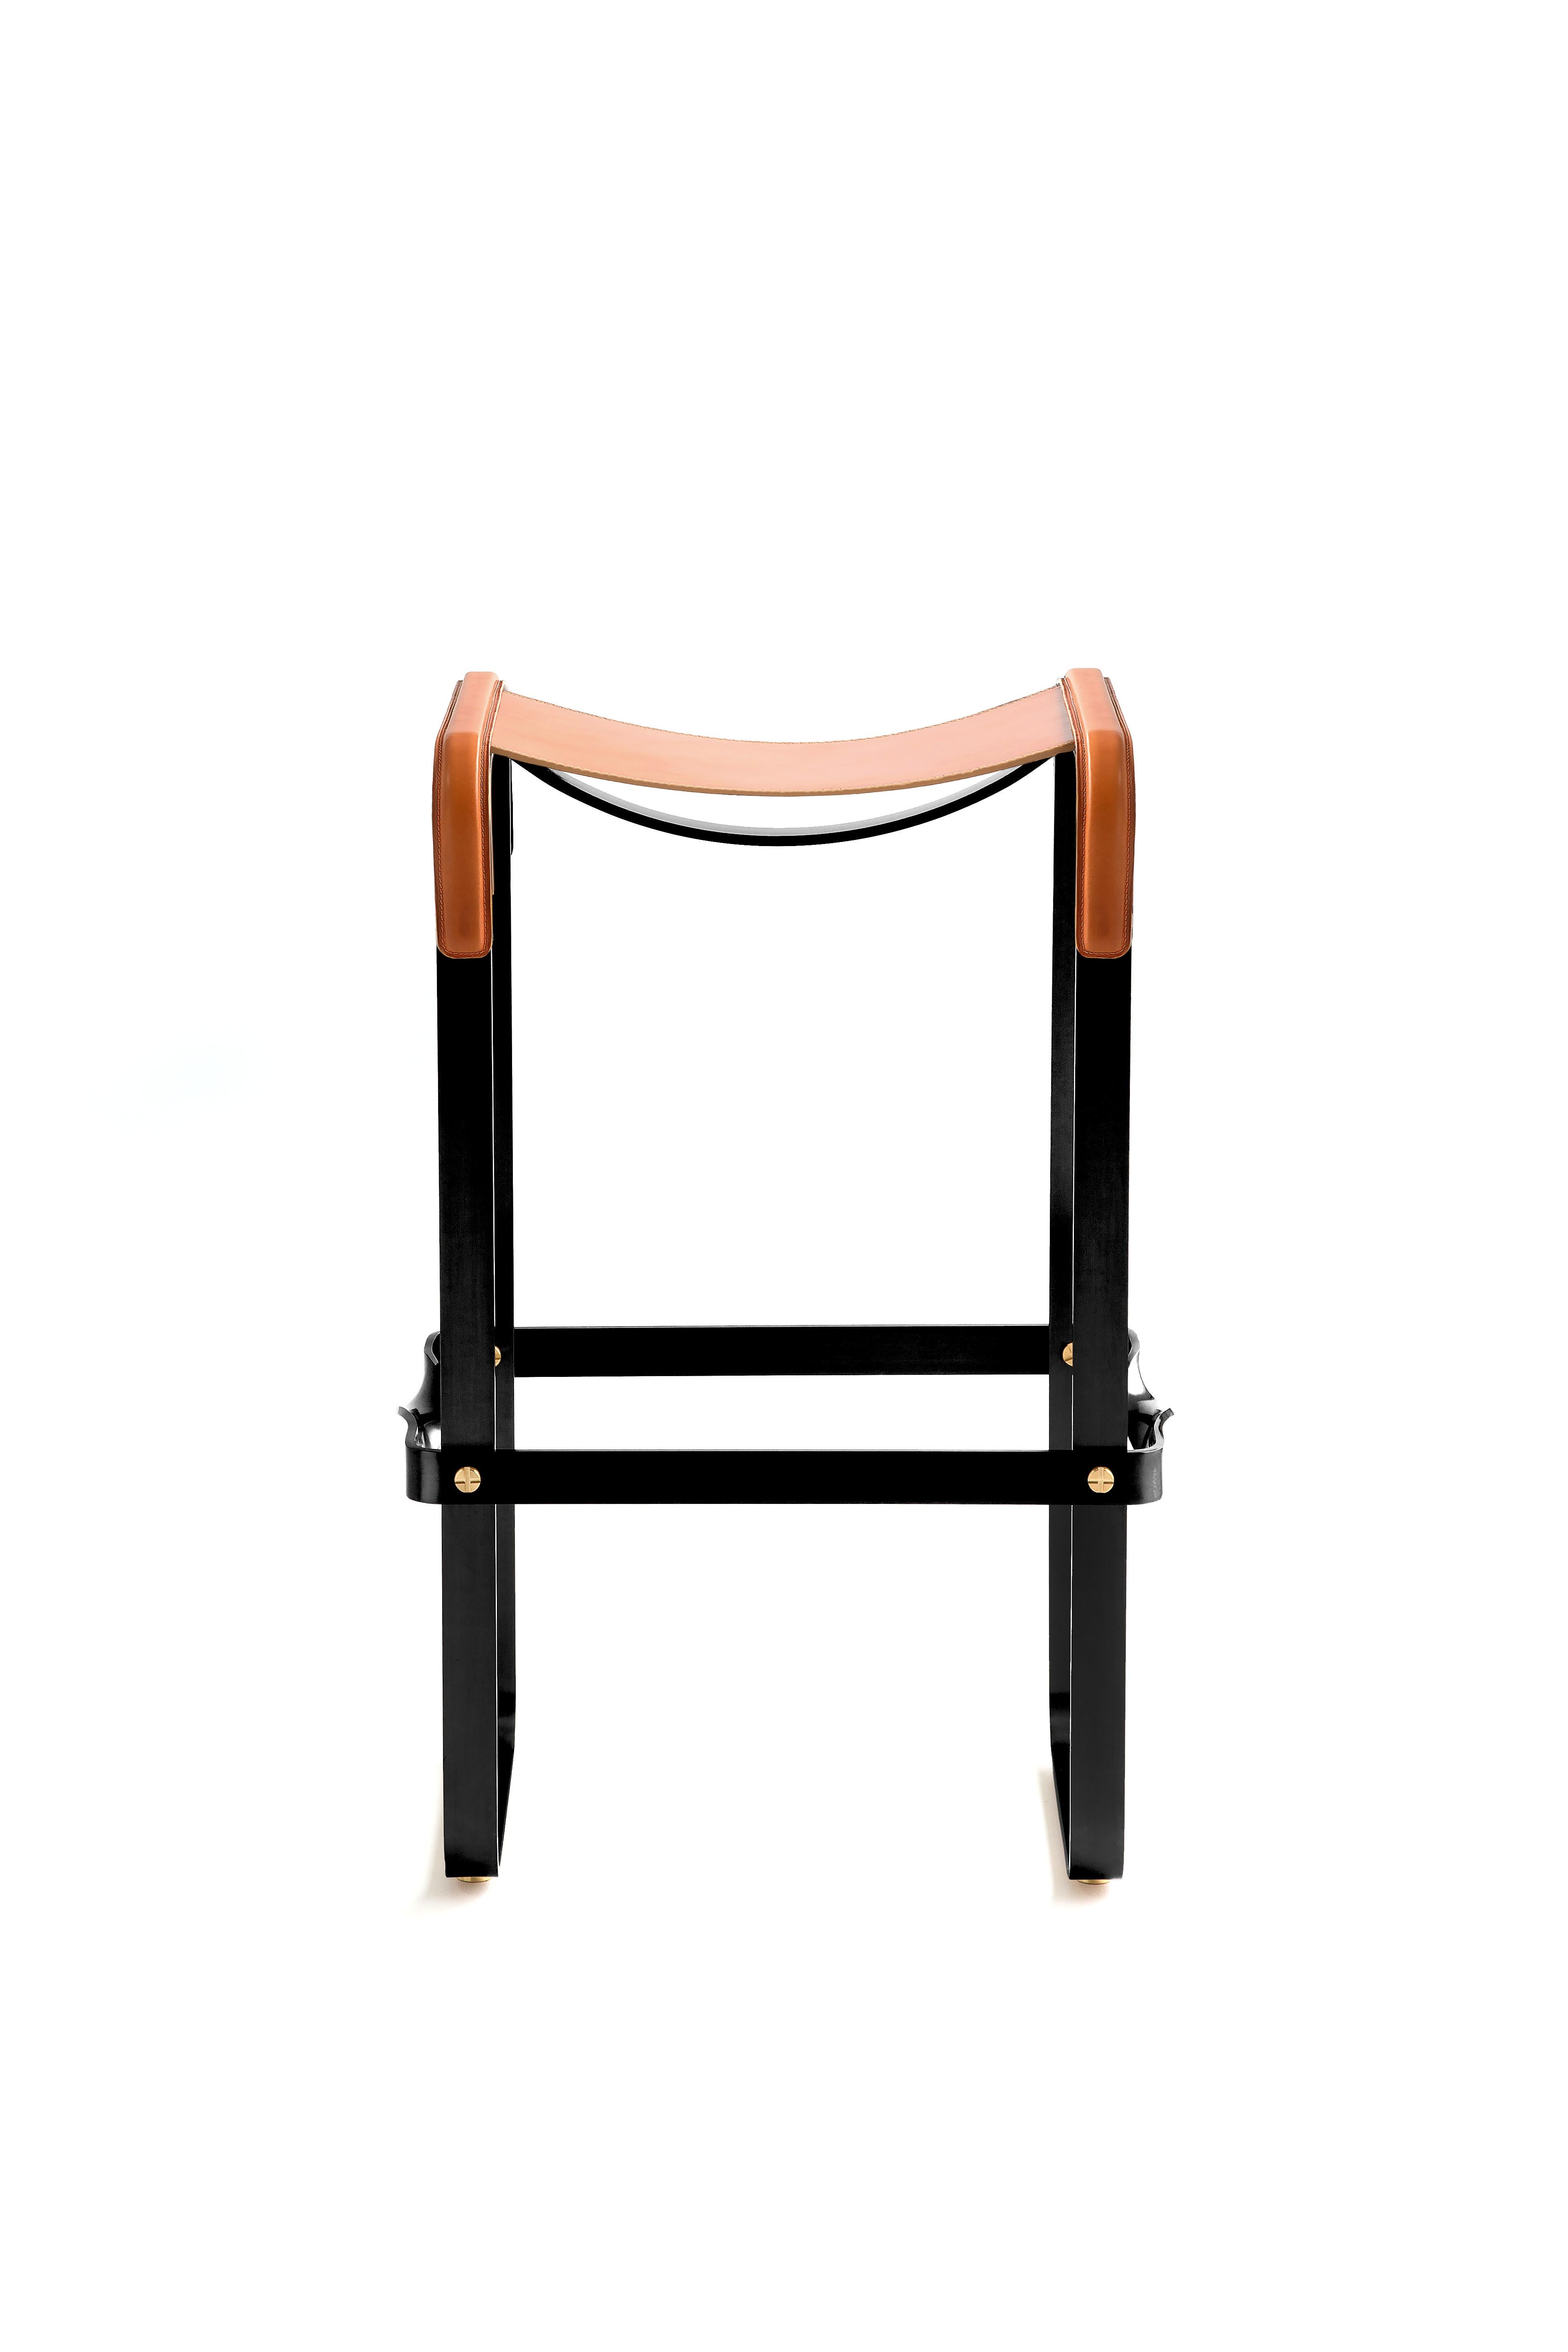 The Wanderlust contemporary barstool belongs to a collection of minimalist and serene pieces where exclusivity and precision are shown in small details such as the hand-turned metal nuts and bolts that fix the leather surfaces, that go unnoticed at